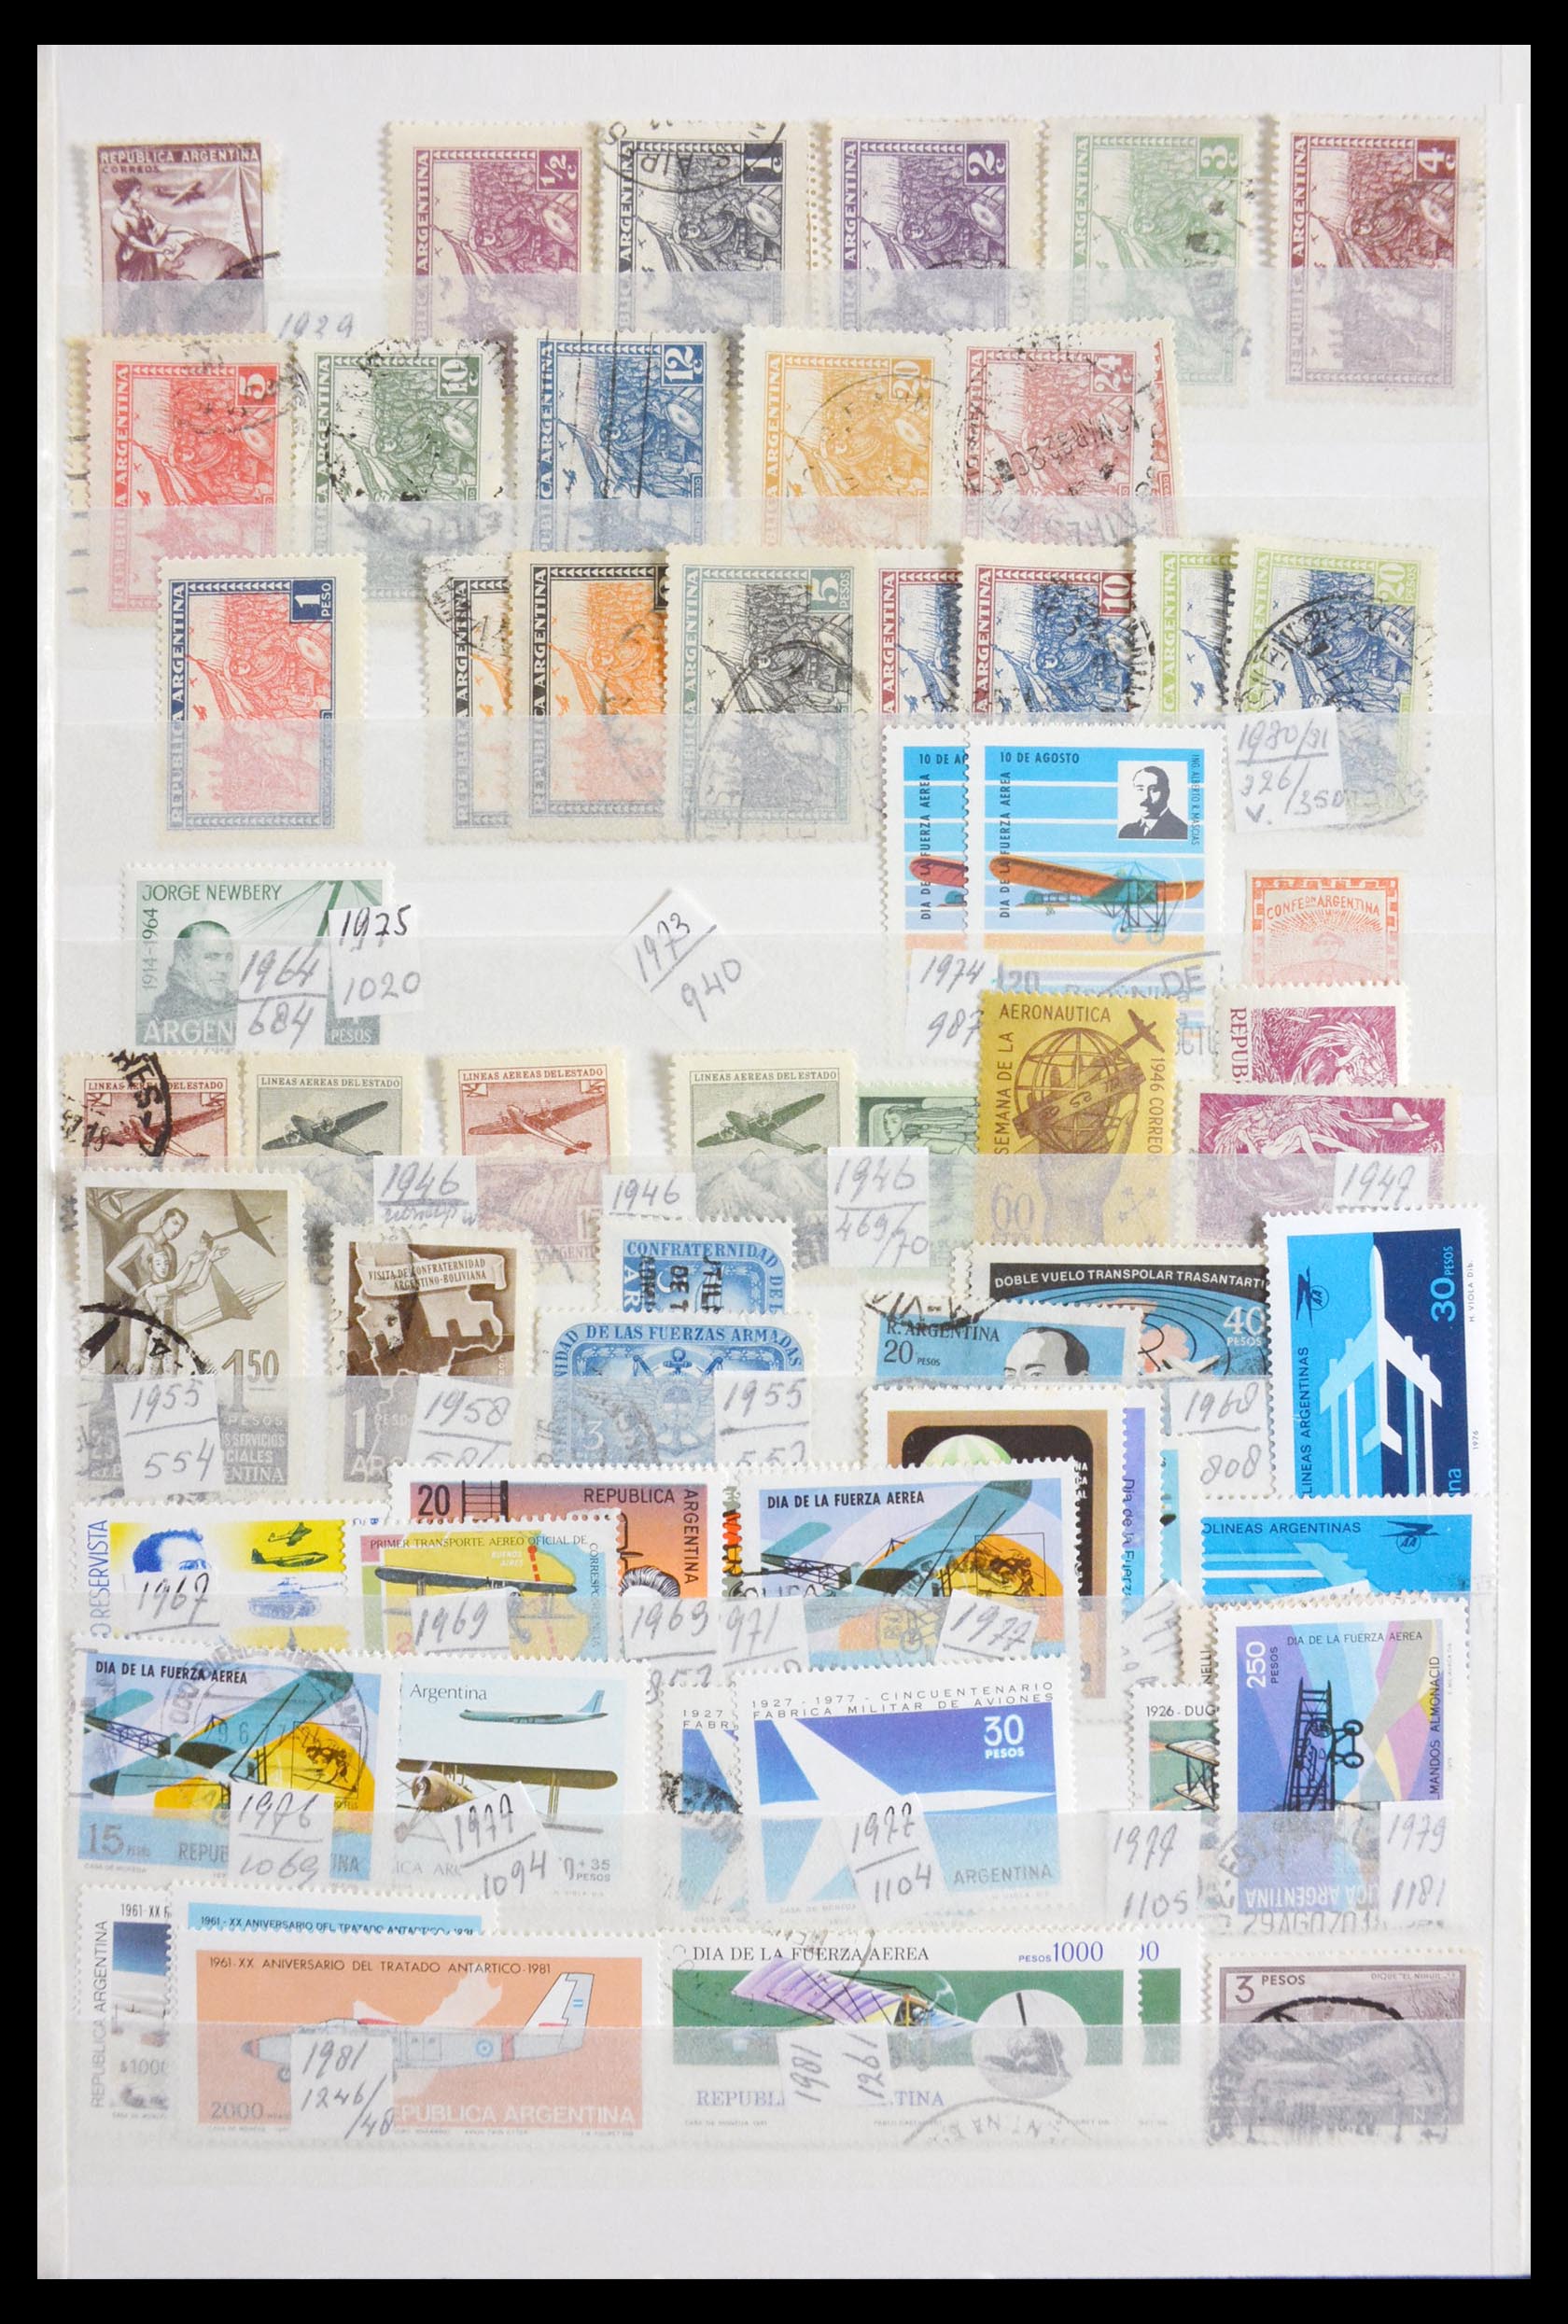 29917 009 - 29917 Latin America airmail stamps.